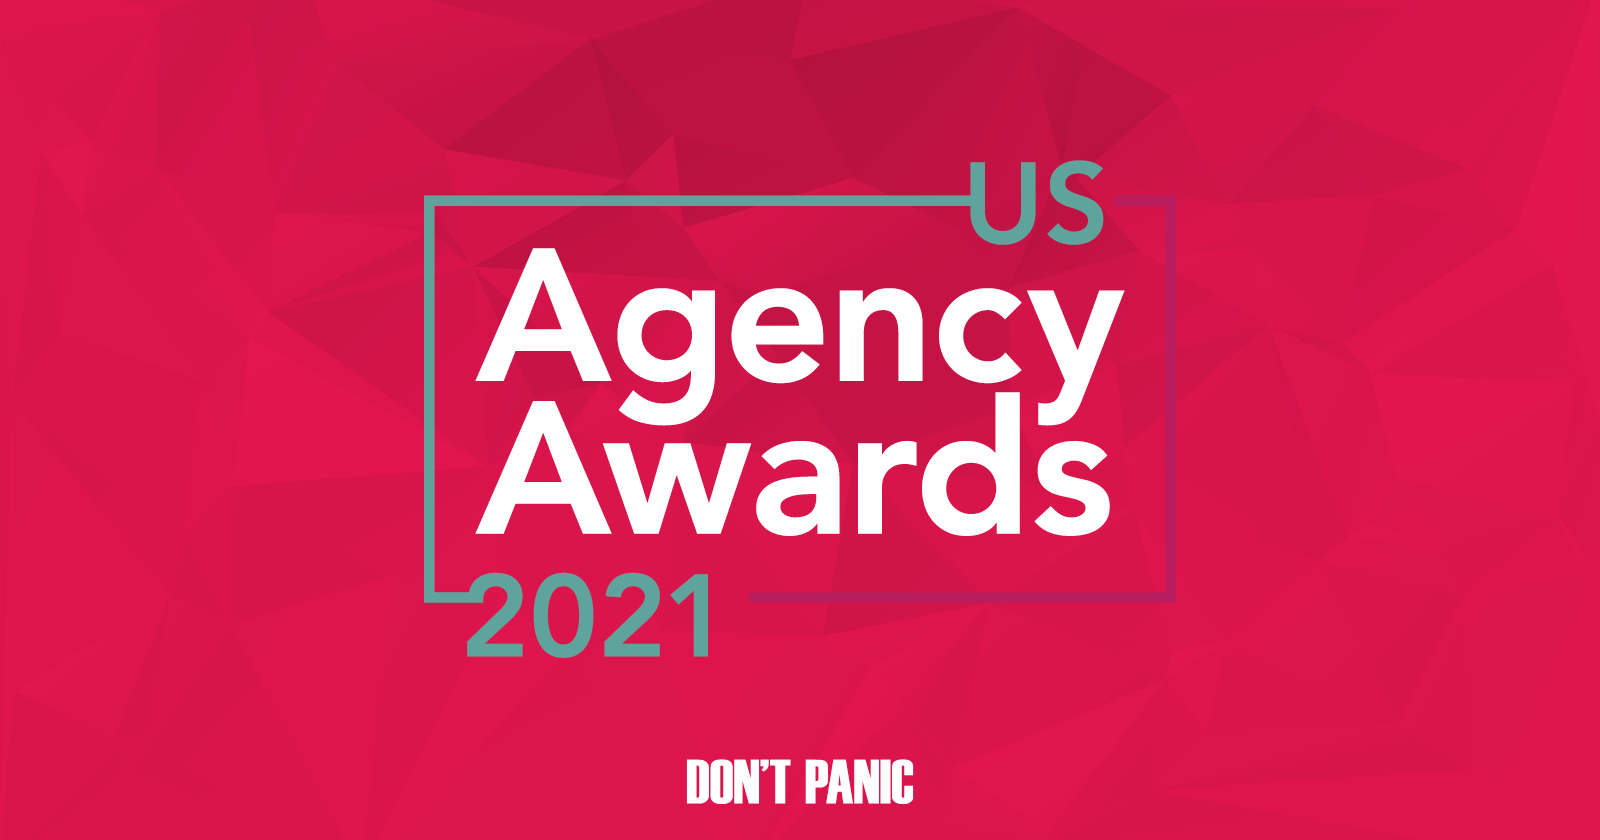 The US Agency Awards Took To The Virtual Stage On November 23, 2021 via @sejournal, @dontpanicevents